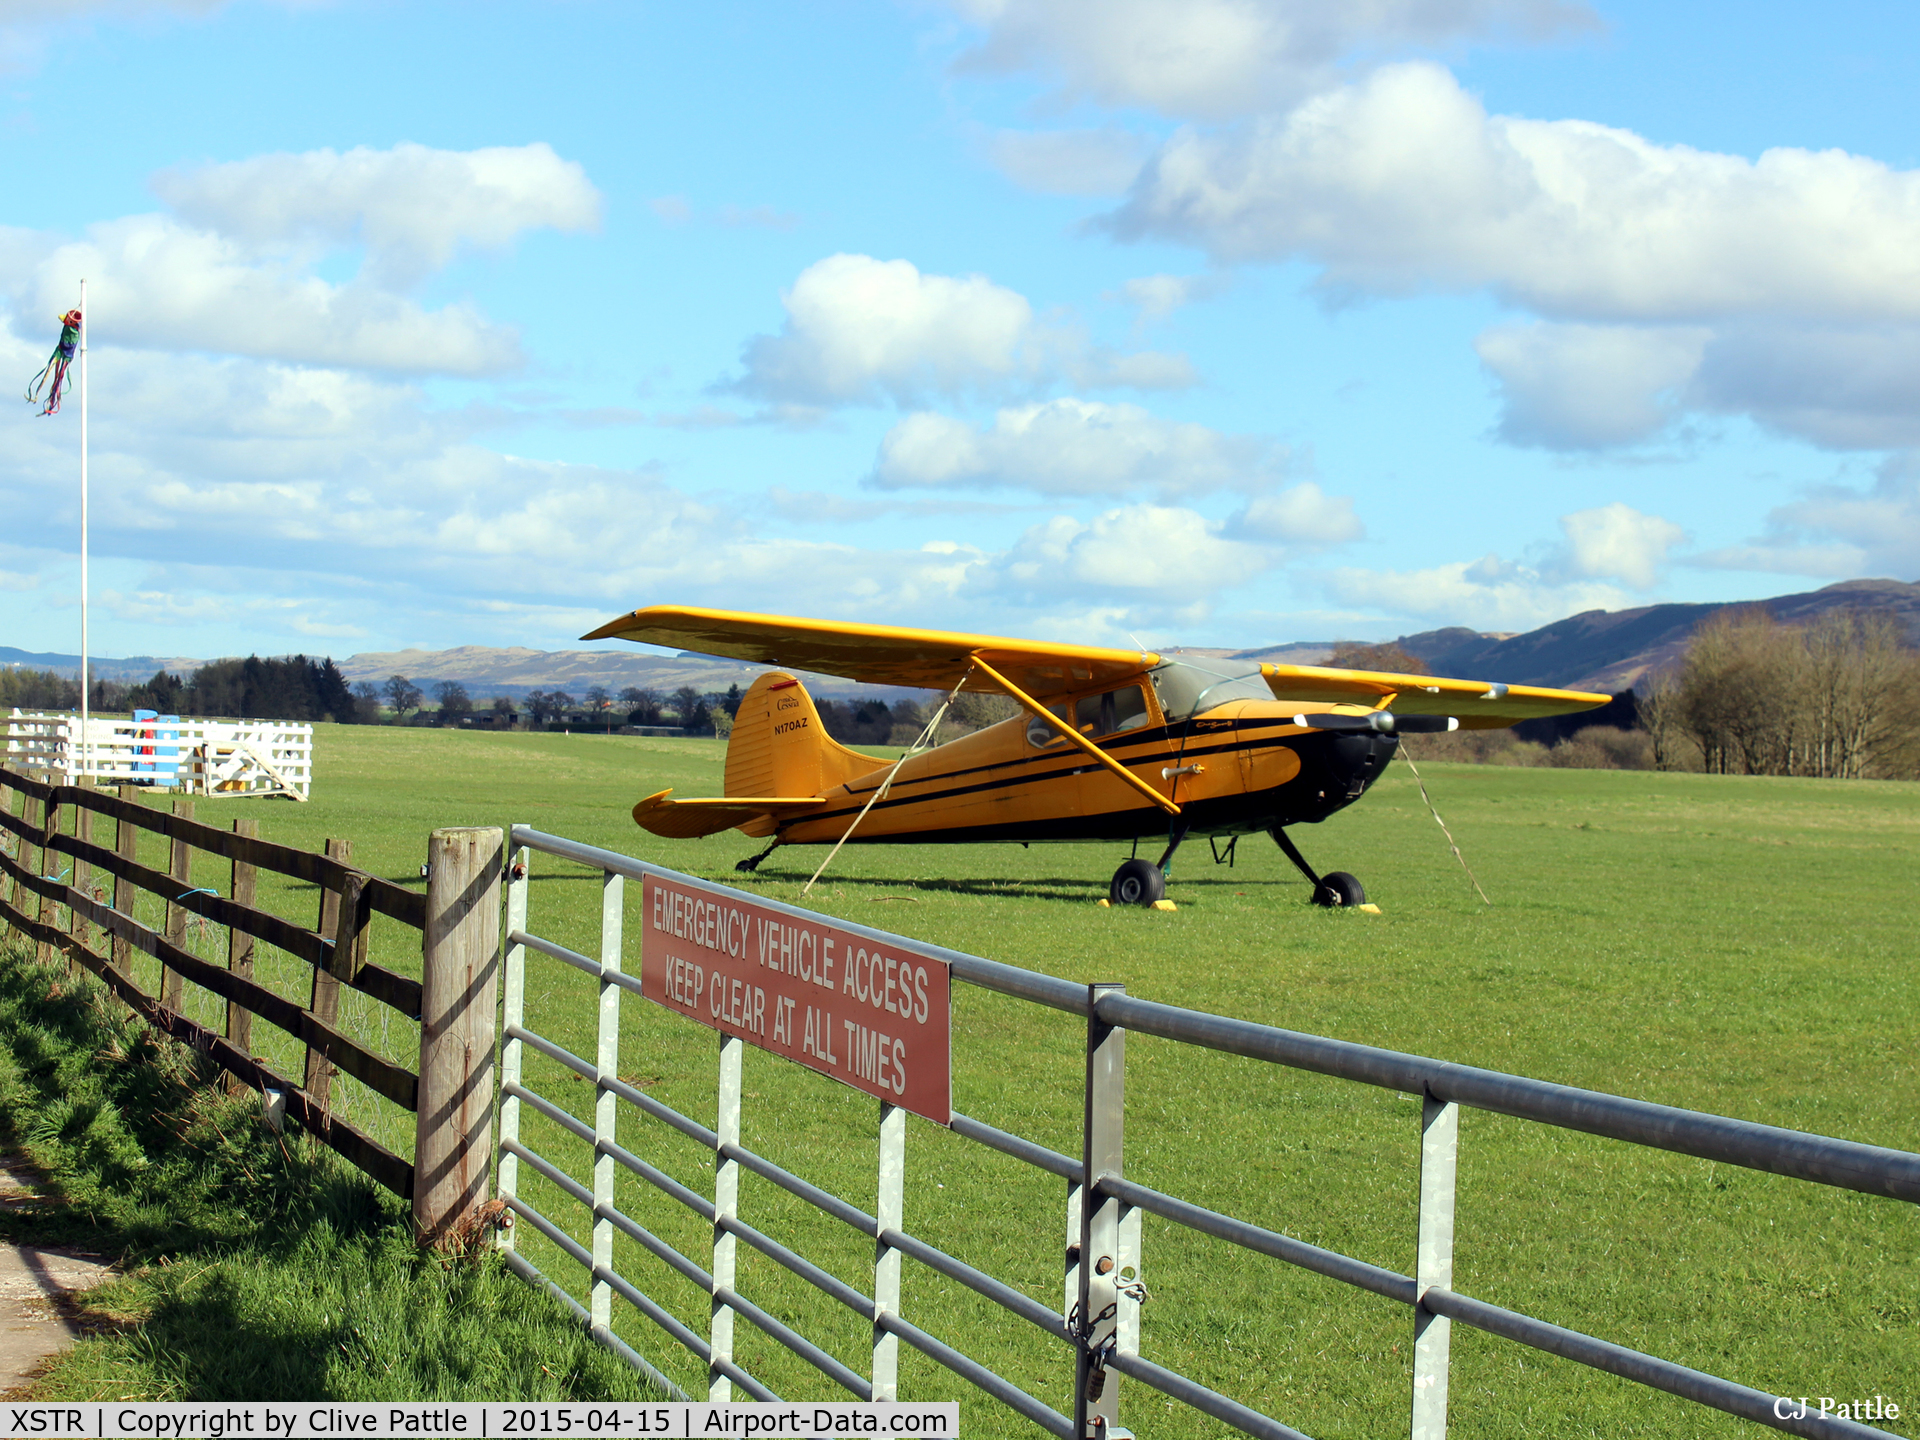 XSTR Airport - Looking airside onto the Strathallan Airfield, XSTR, near Auchterarder, Perthshire, Scotland - the home of Skydive Scotland